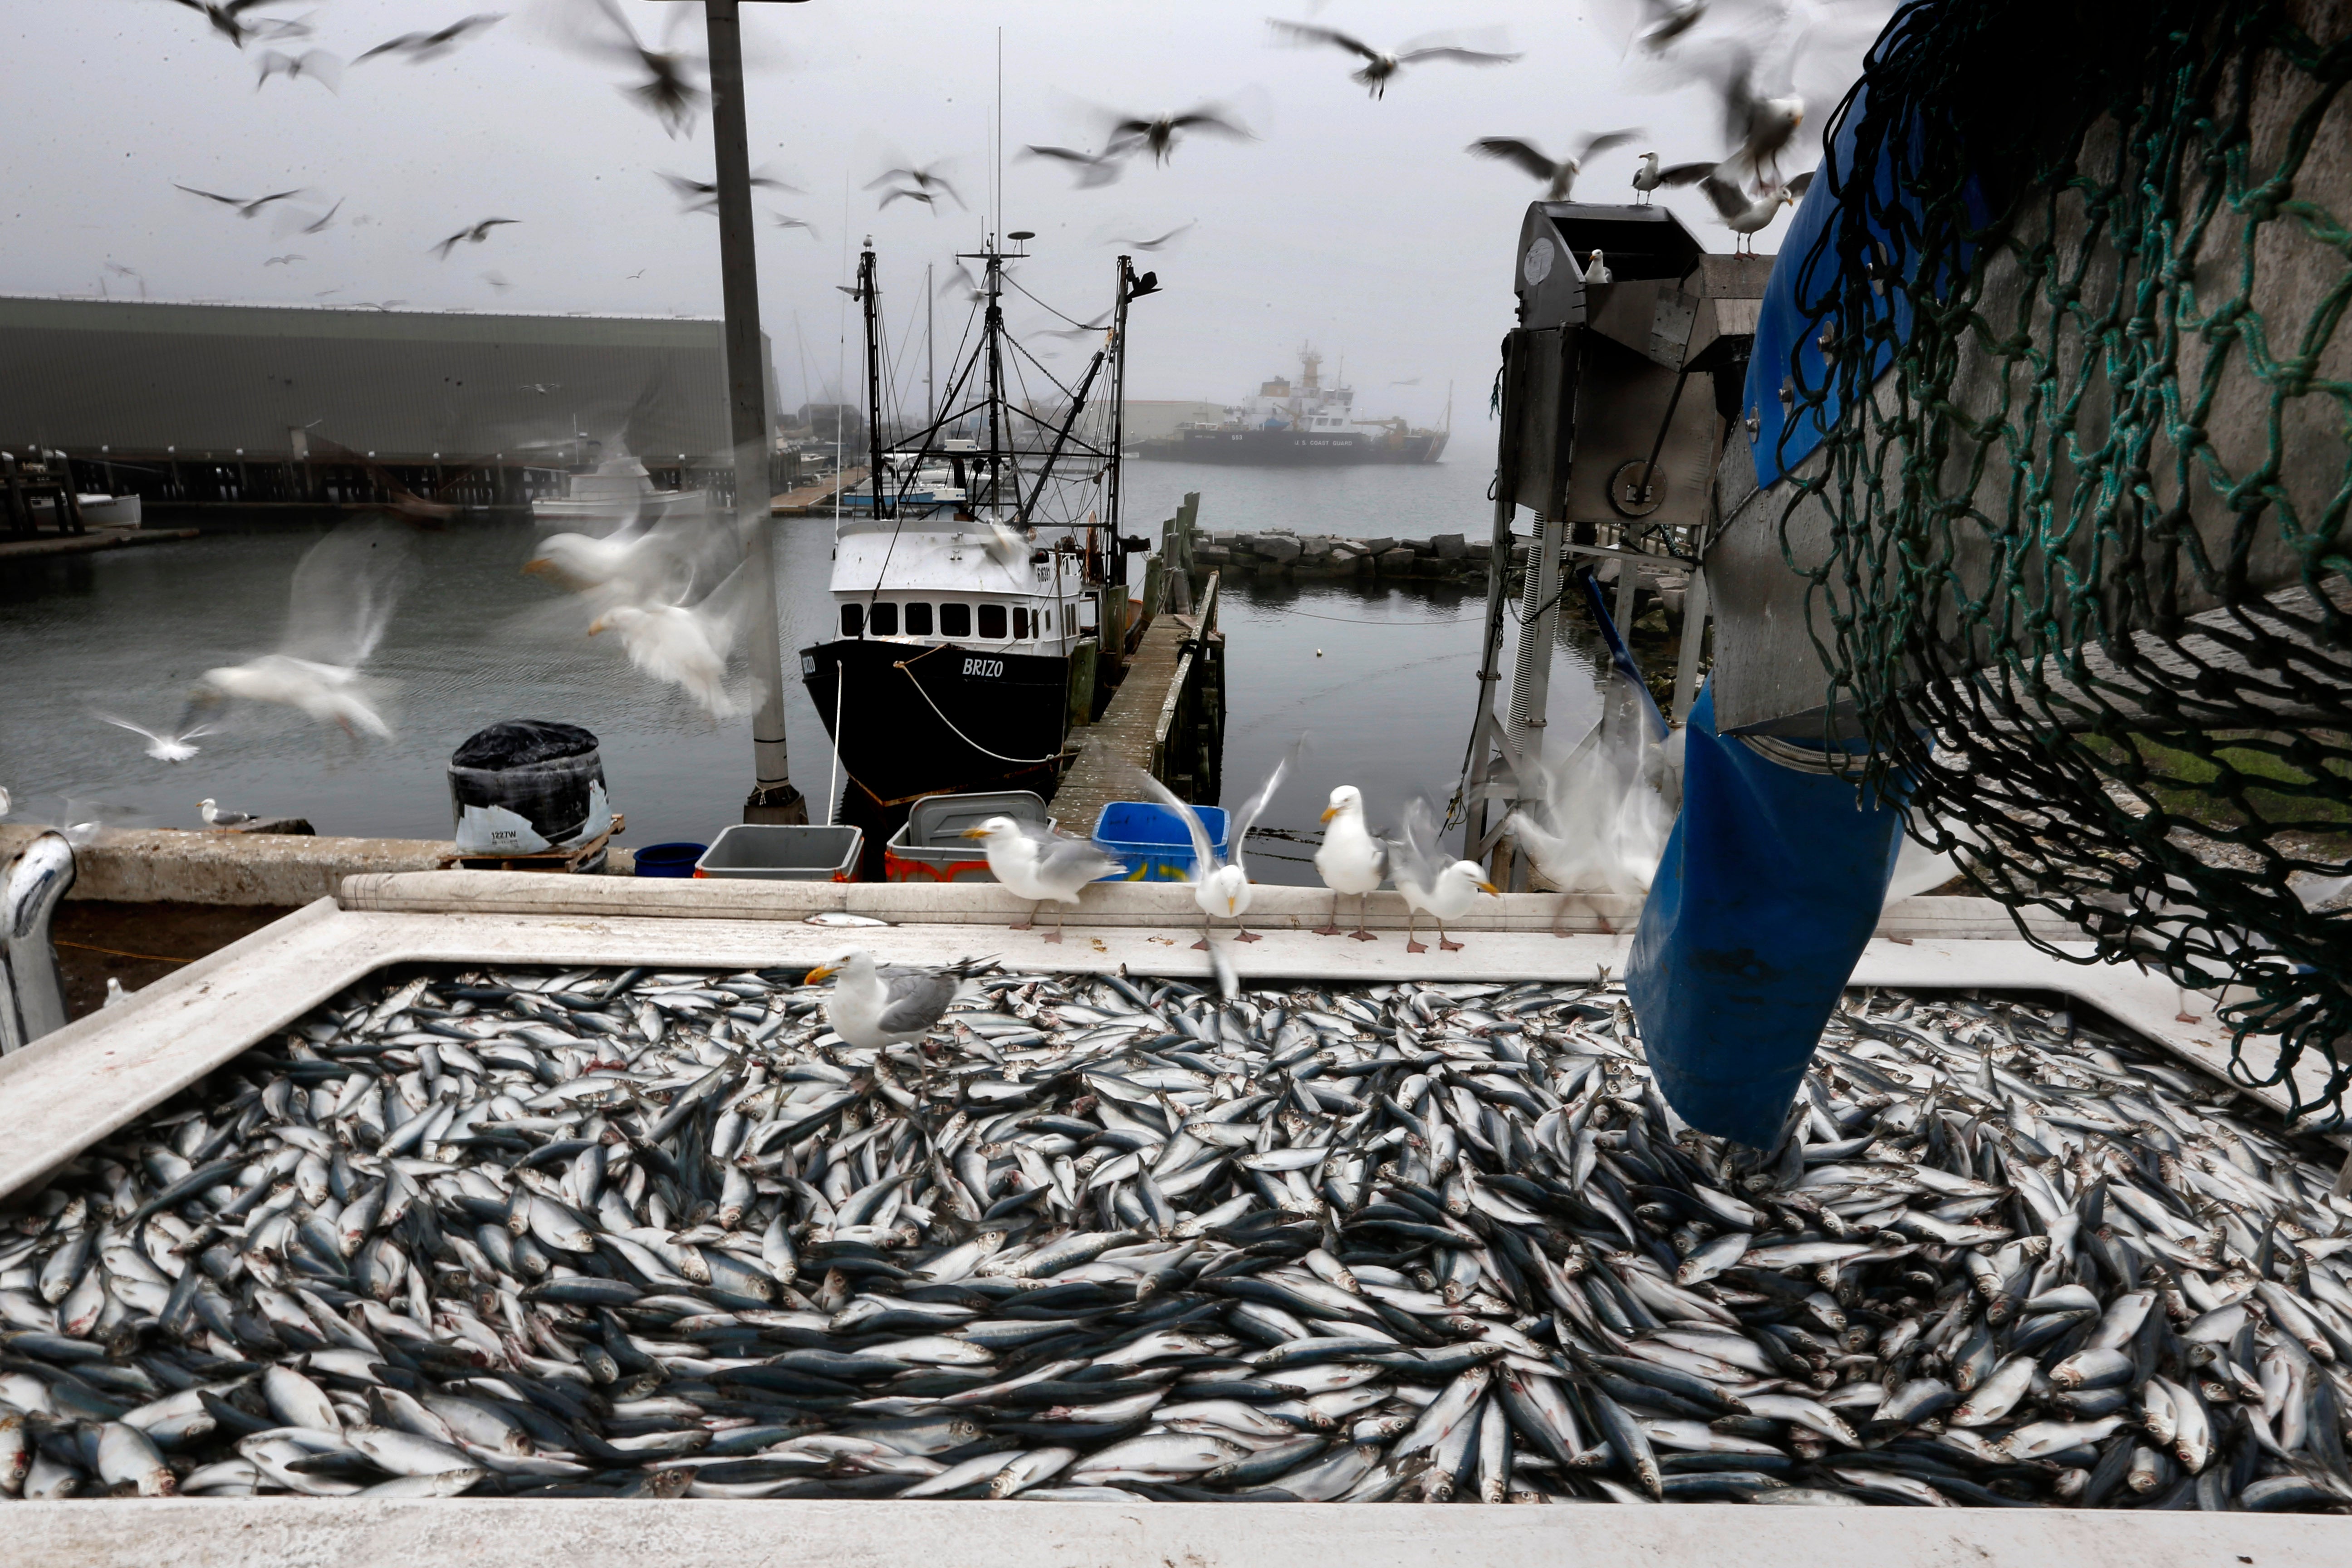 Herring are unloaded from a fishing boat in Rockland, Maine, July 8, 2015. The opportunity to reverse Chevron arose from a lawsuit between a disgruntled fishing company and the National Marine Fisheries Service. The fishing company resented a 2020 rule that forced them to pay for government-manded observers aboard their boats to monitor for overfishing